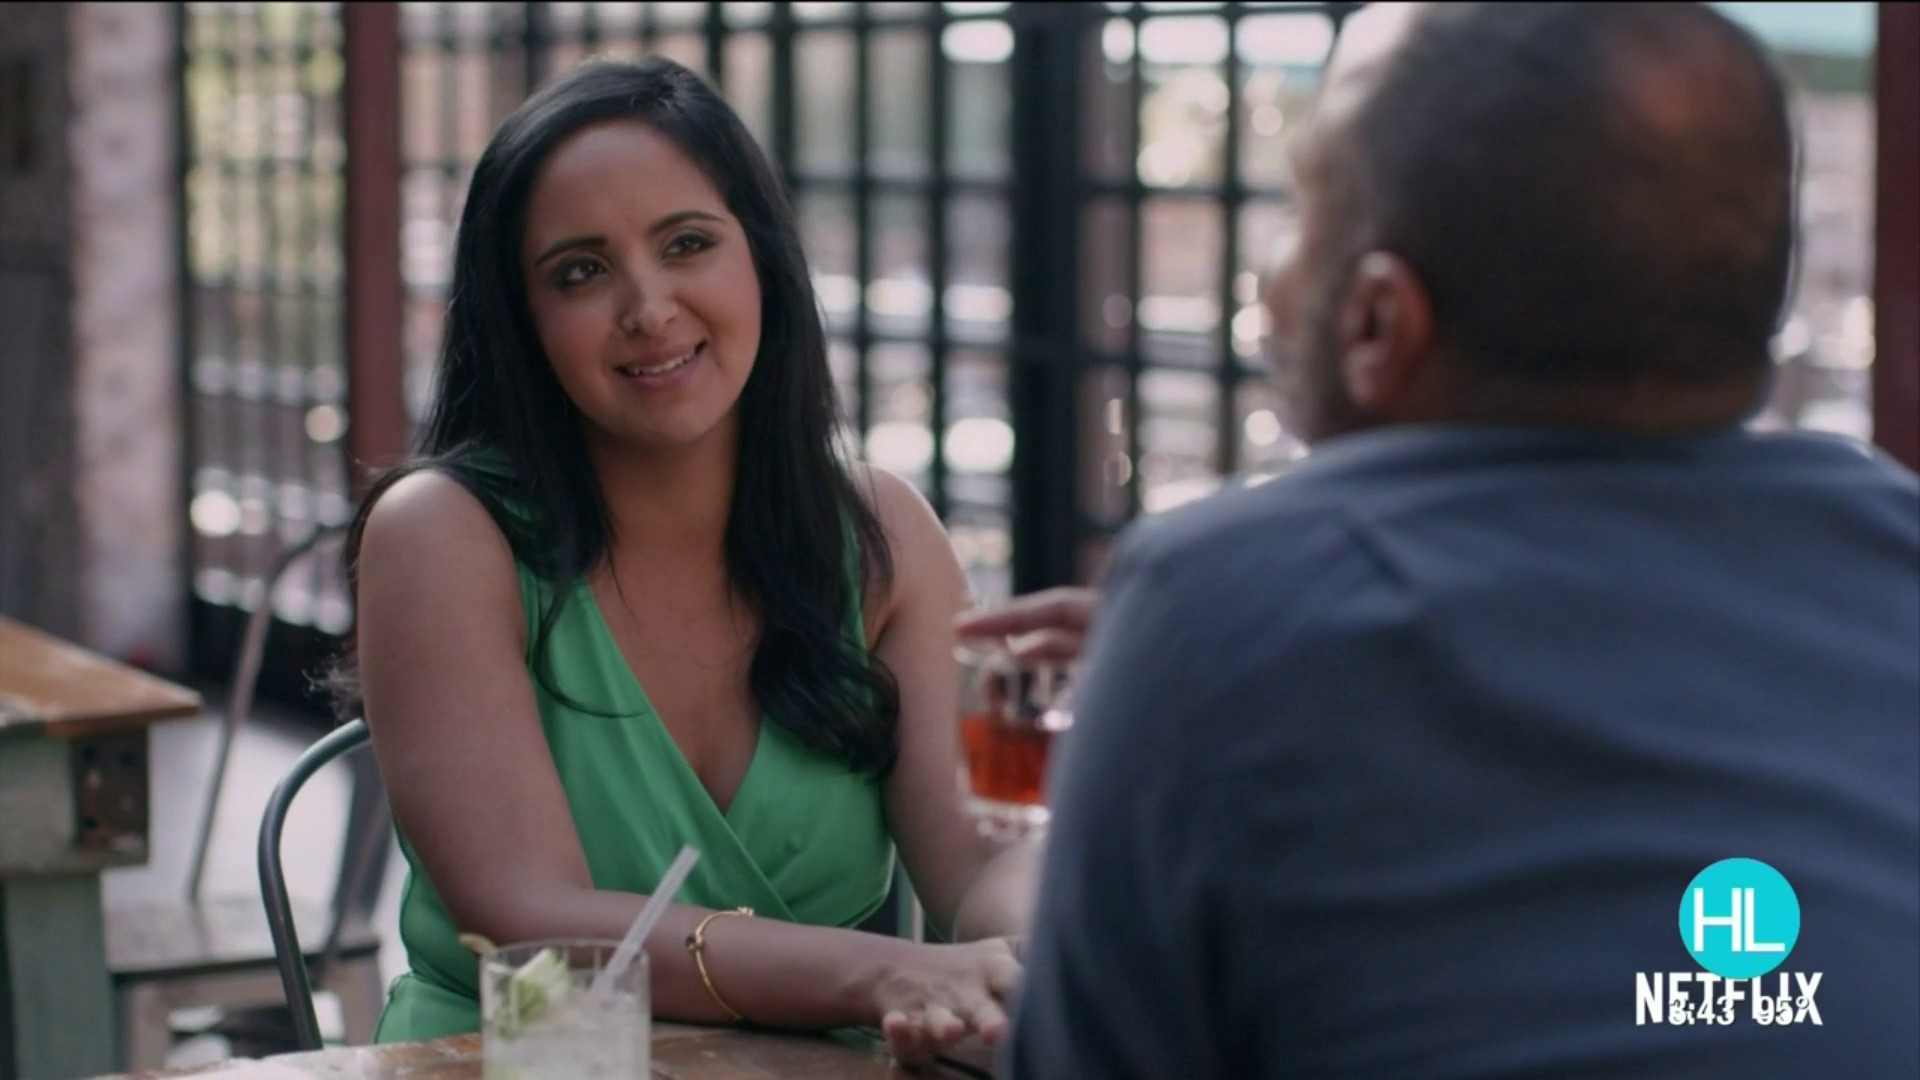 This Houston lawyer is the star of Netflix's hit show 'Indian Matchmaking'